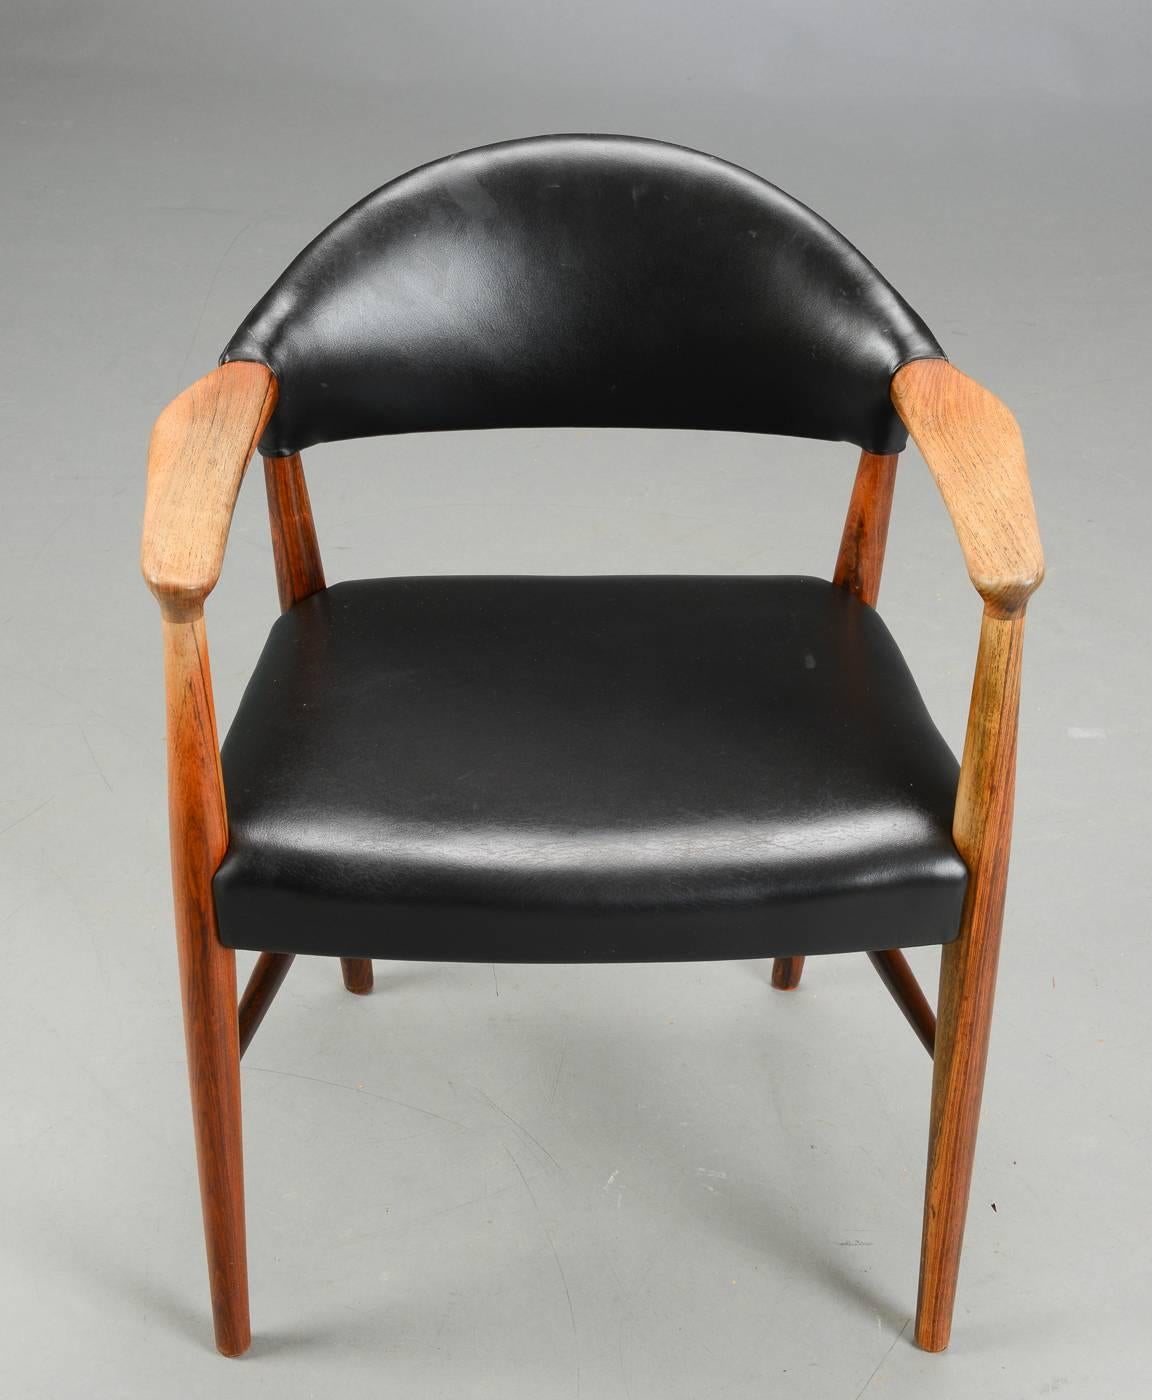 A fine quality Danish rosewood and black leather armchair by Kurt Olsen, ideal as cool Mid-Century occasional chair or a very nice chair to sit at a rosewood desk.